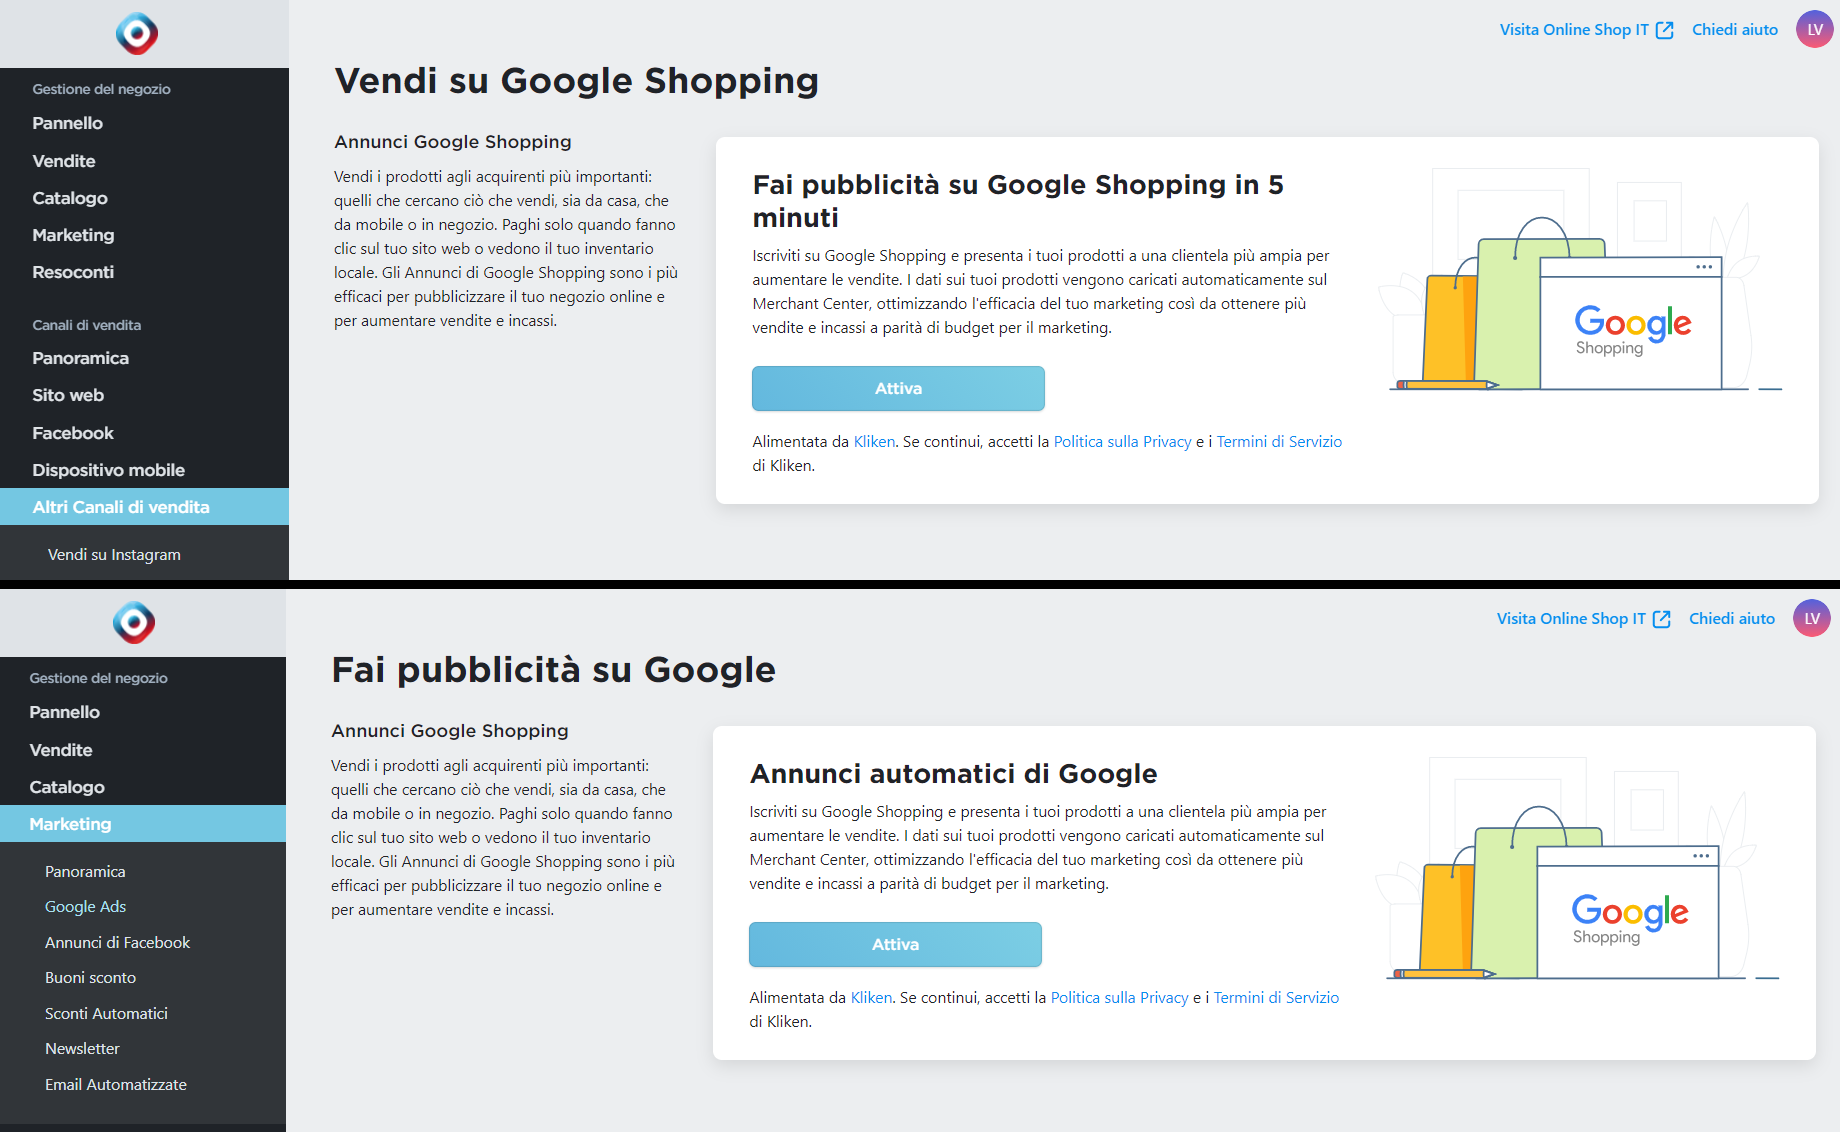 accedere a Google Shopping nel conto MyCOMMERCE